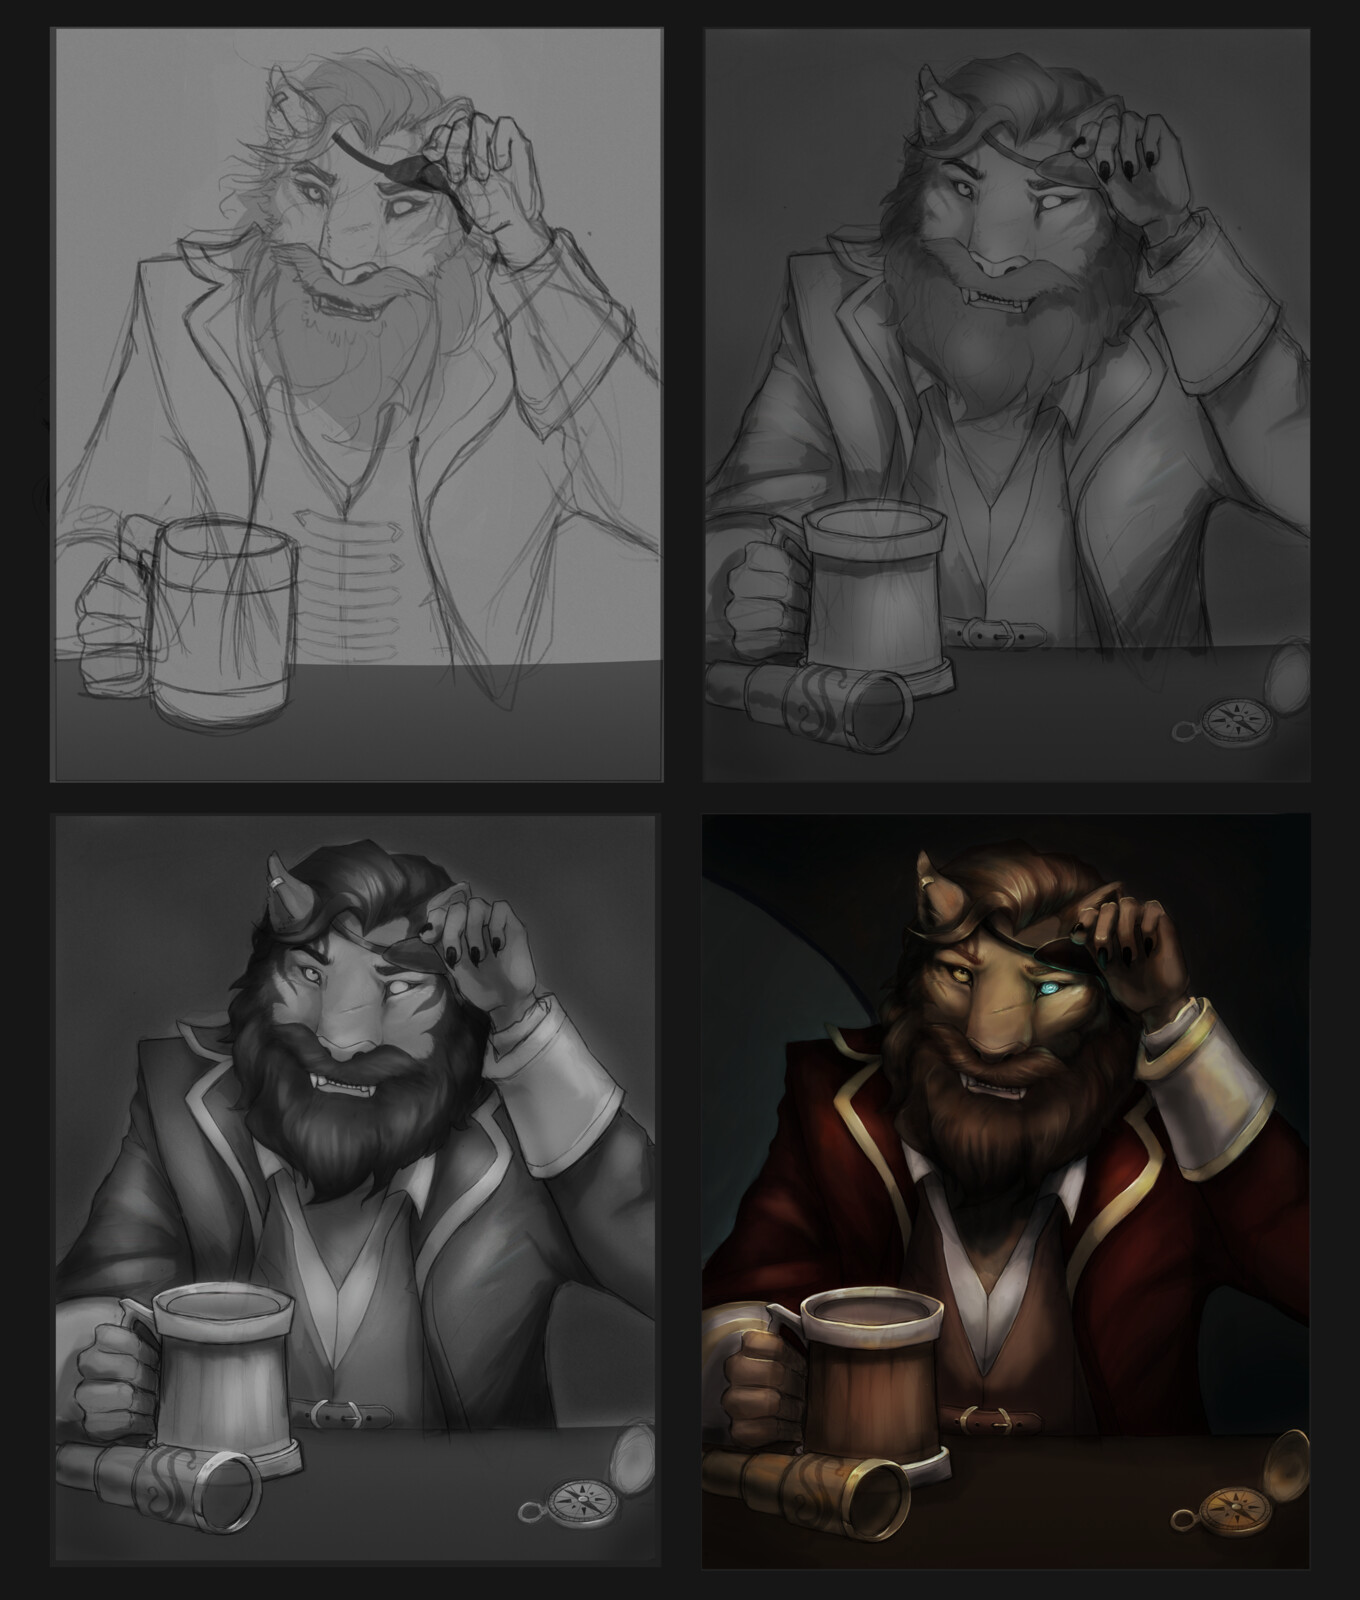 Step by step process of how the portrait progressed